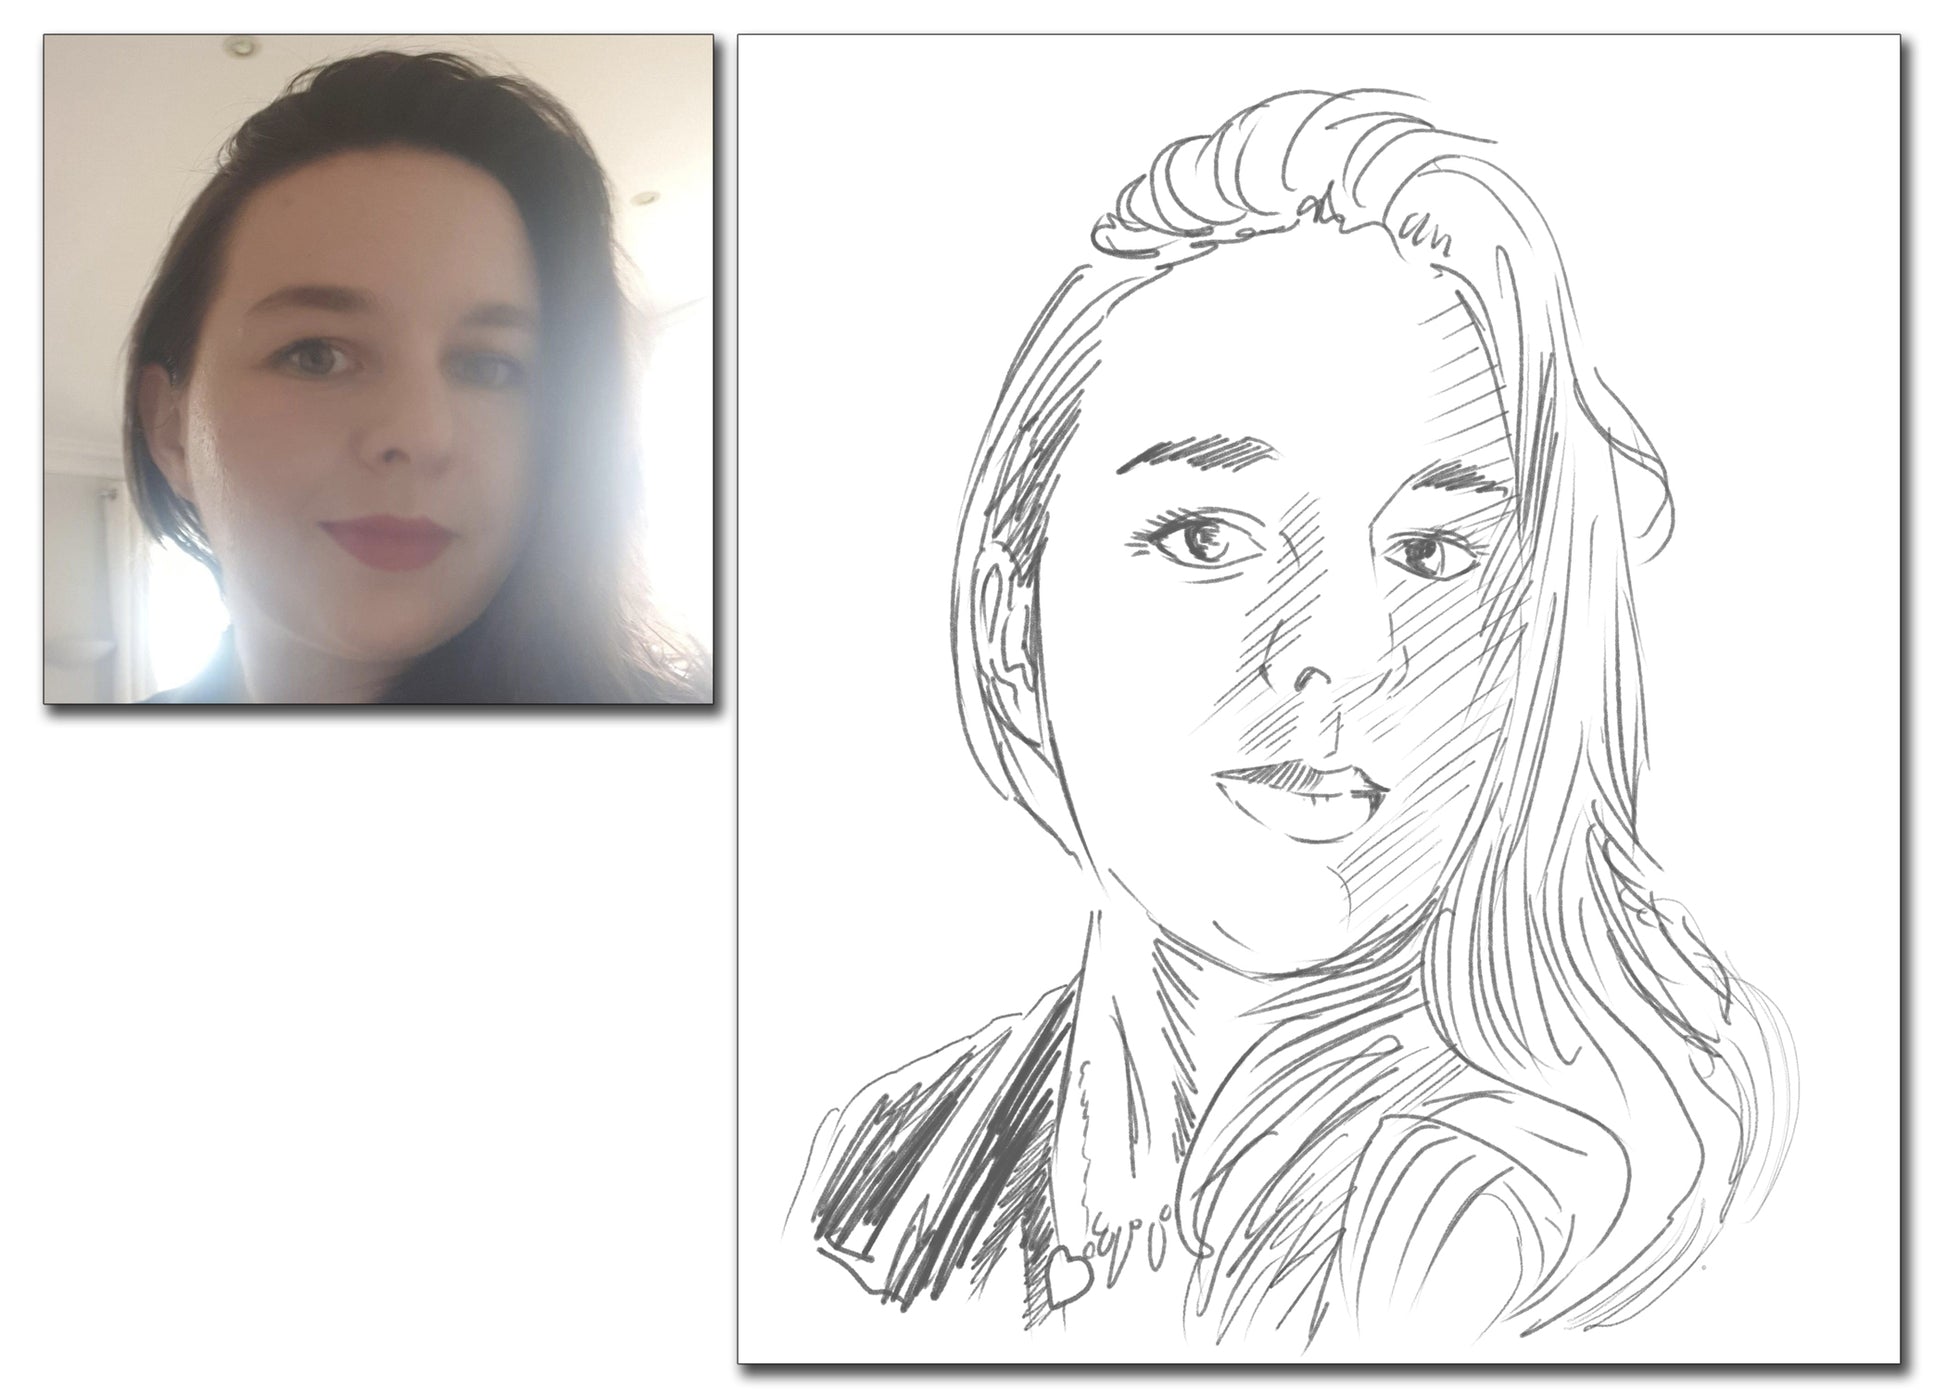 Hand Drawn Digital People Portrait Sketch - Custom Made Caricature Drawing From Photo - Make Me A Comic Ltd